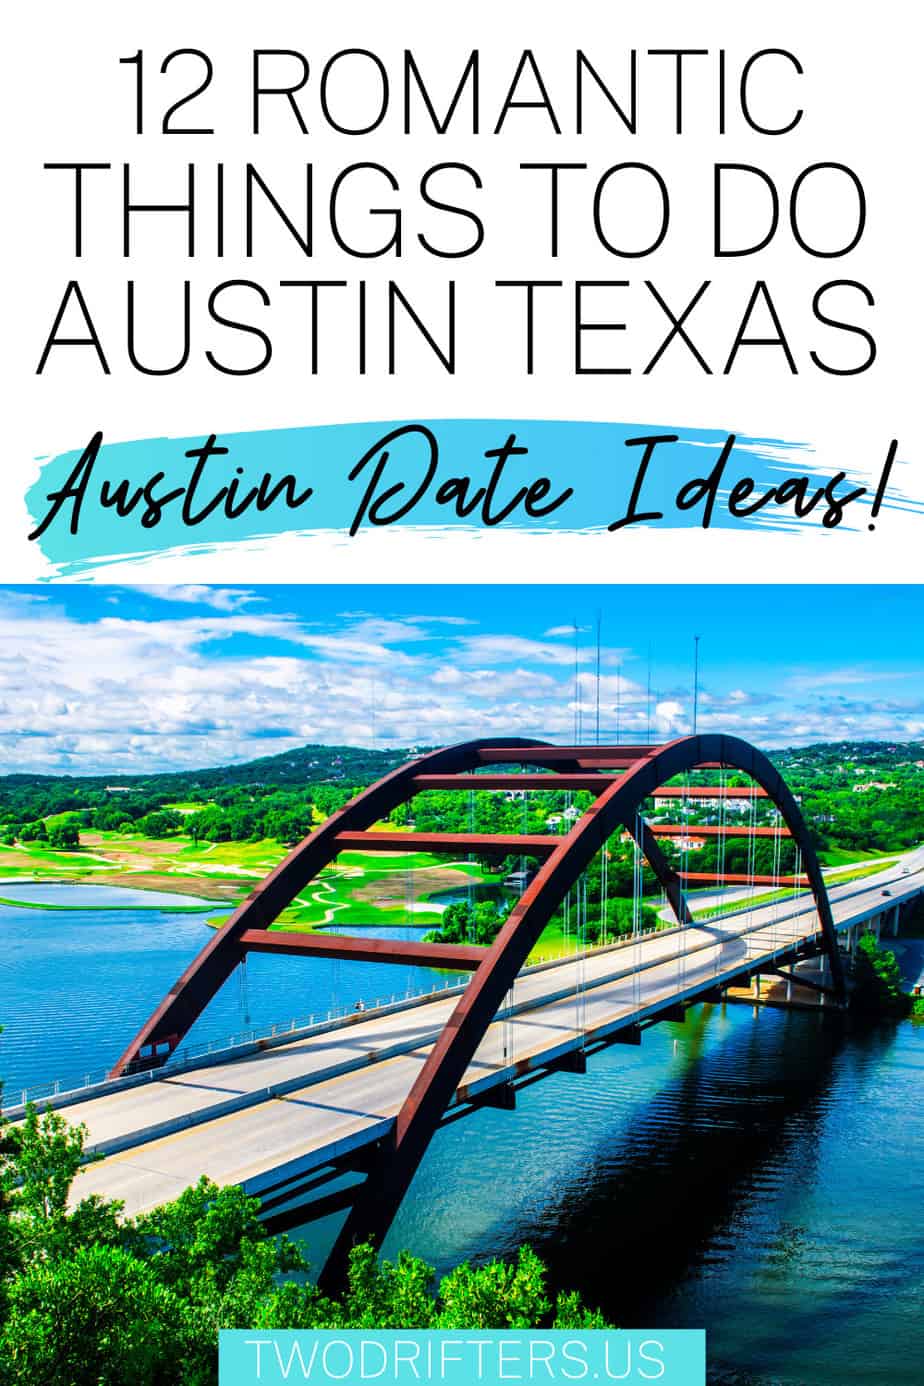 Pinterest social image that says “12 romantic things to do in Austin Texas. Austin date ideas!”